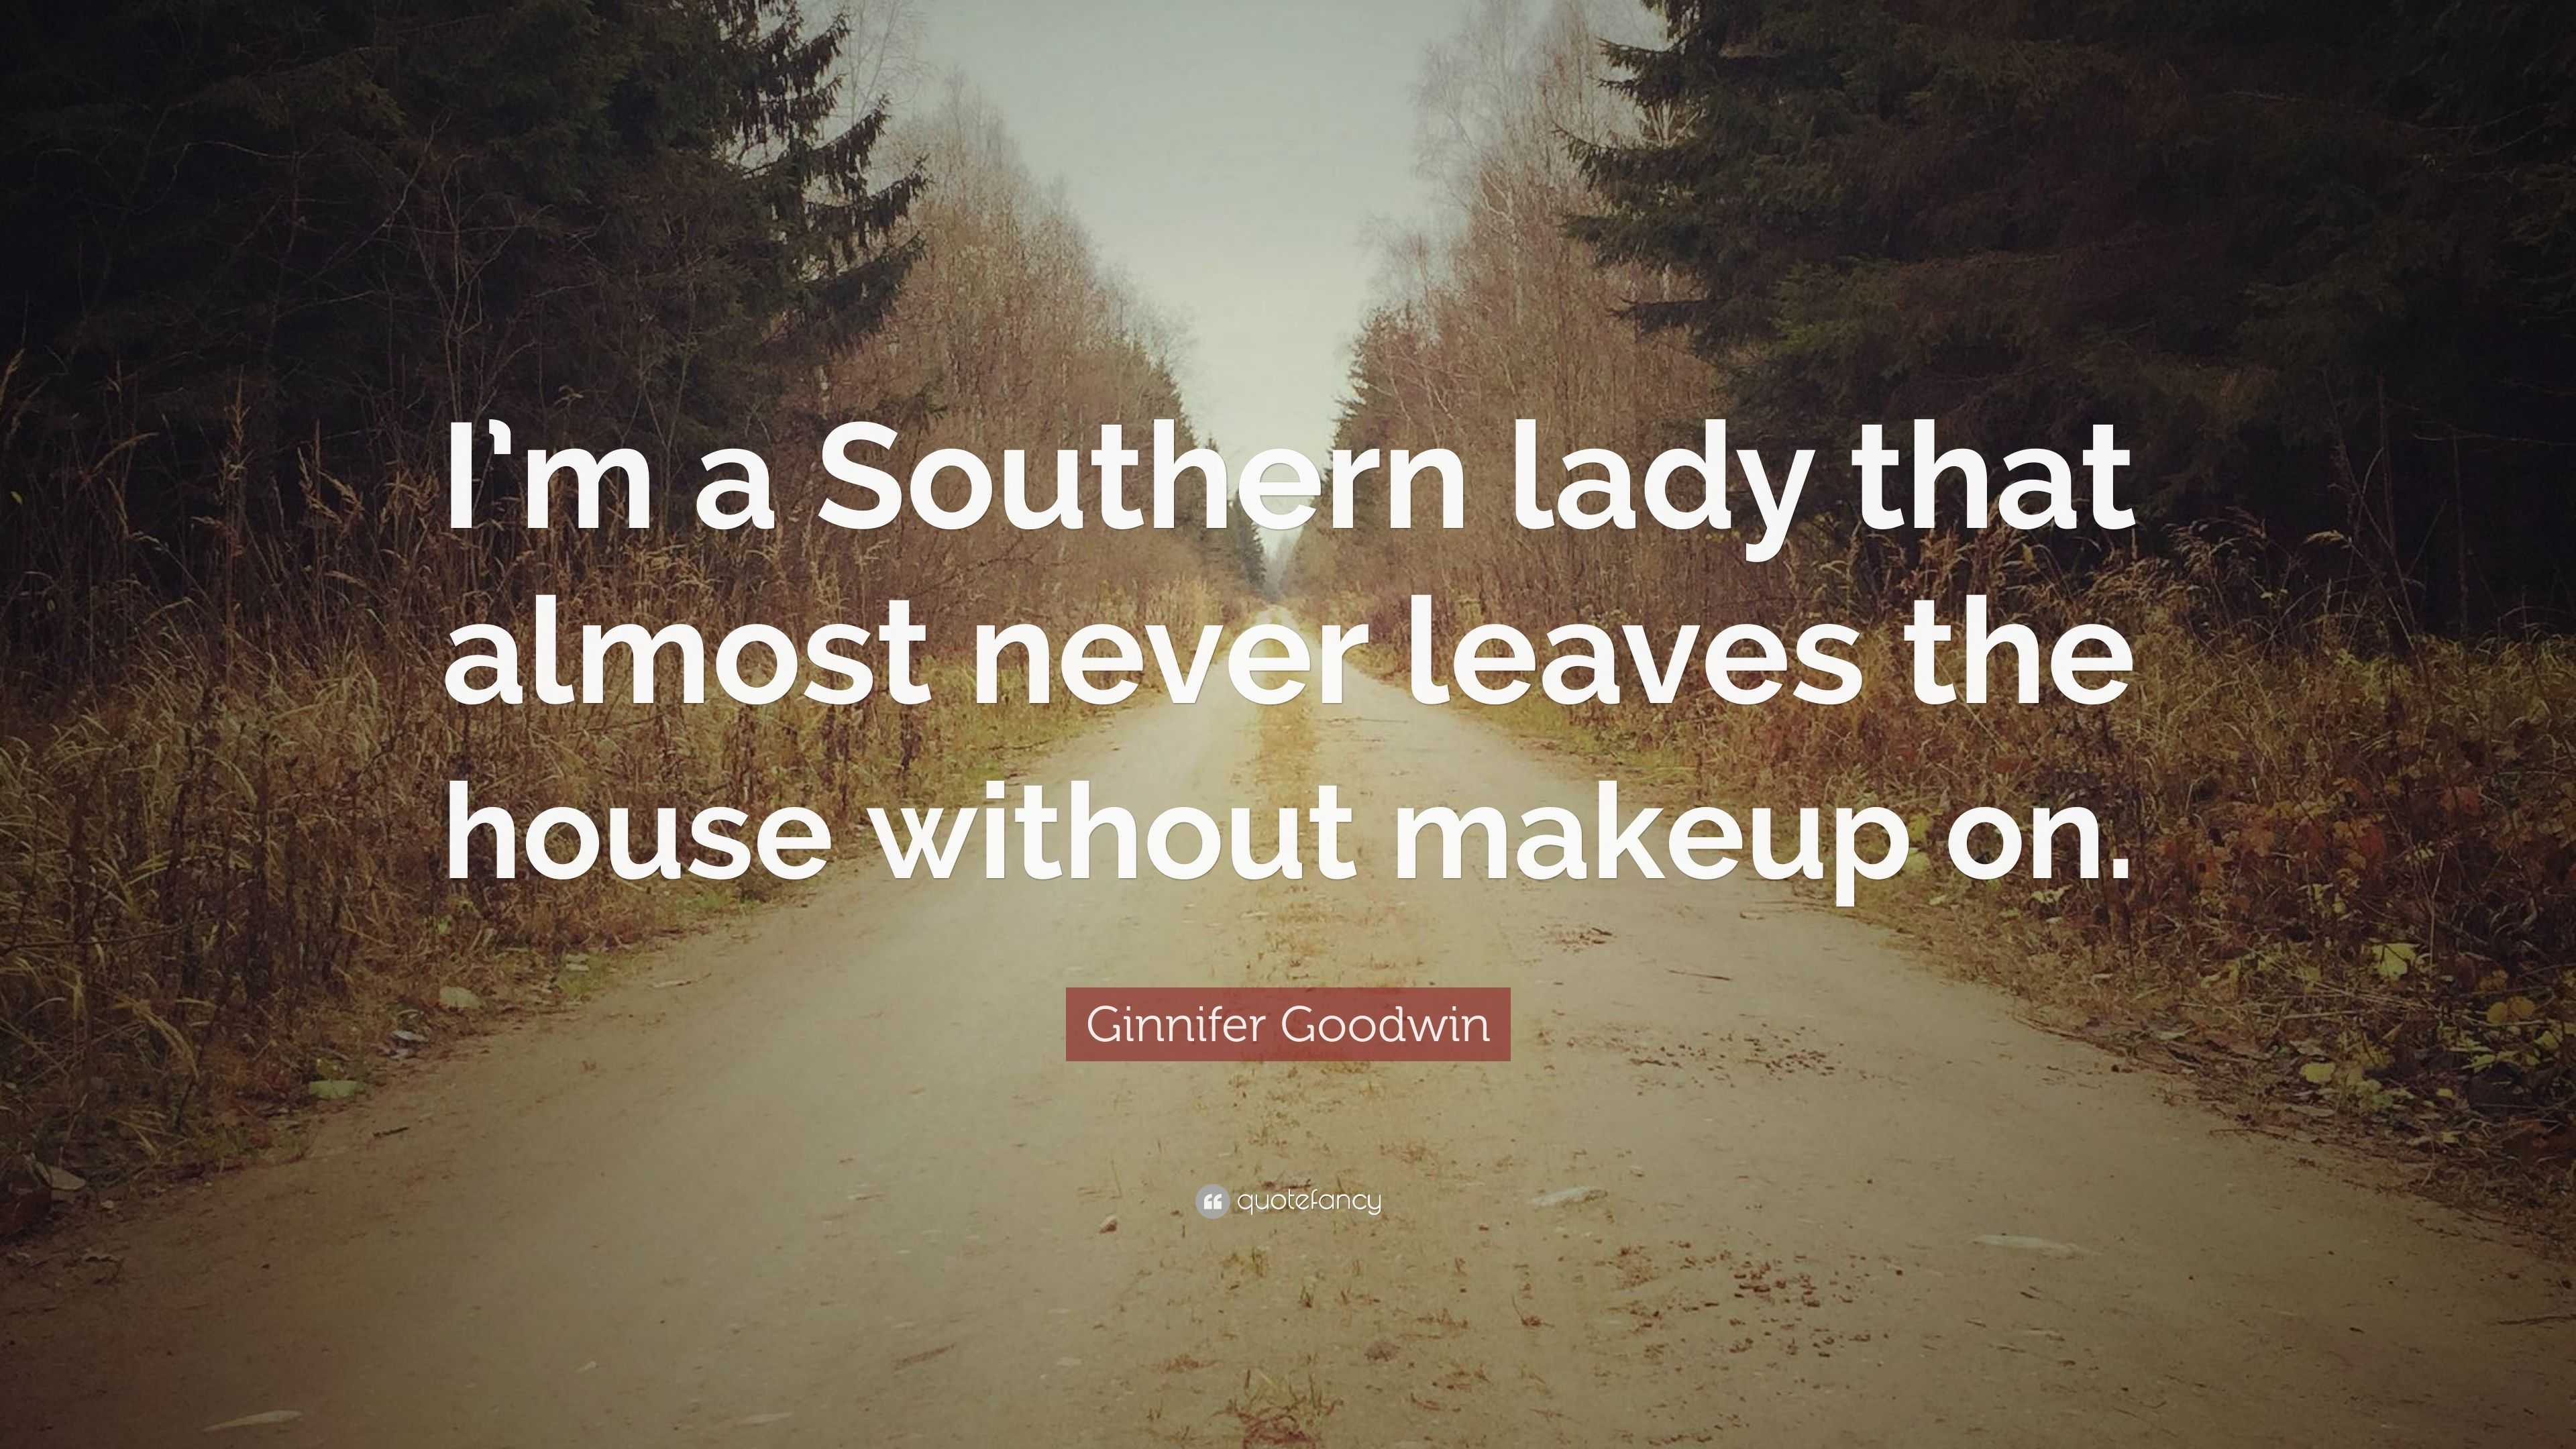 https://quotefancy.com/media/wallpaper/3840x2160/2996969-Ginnifer-Goodwin-Quote-I-m-a-Southern-lady-that-almost-never.jpg